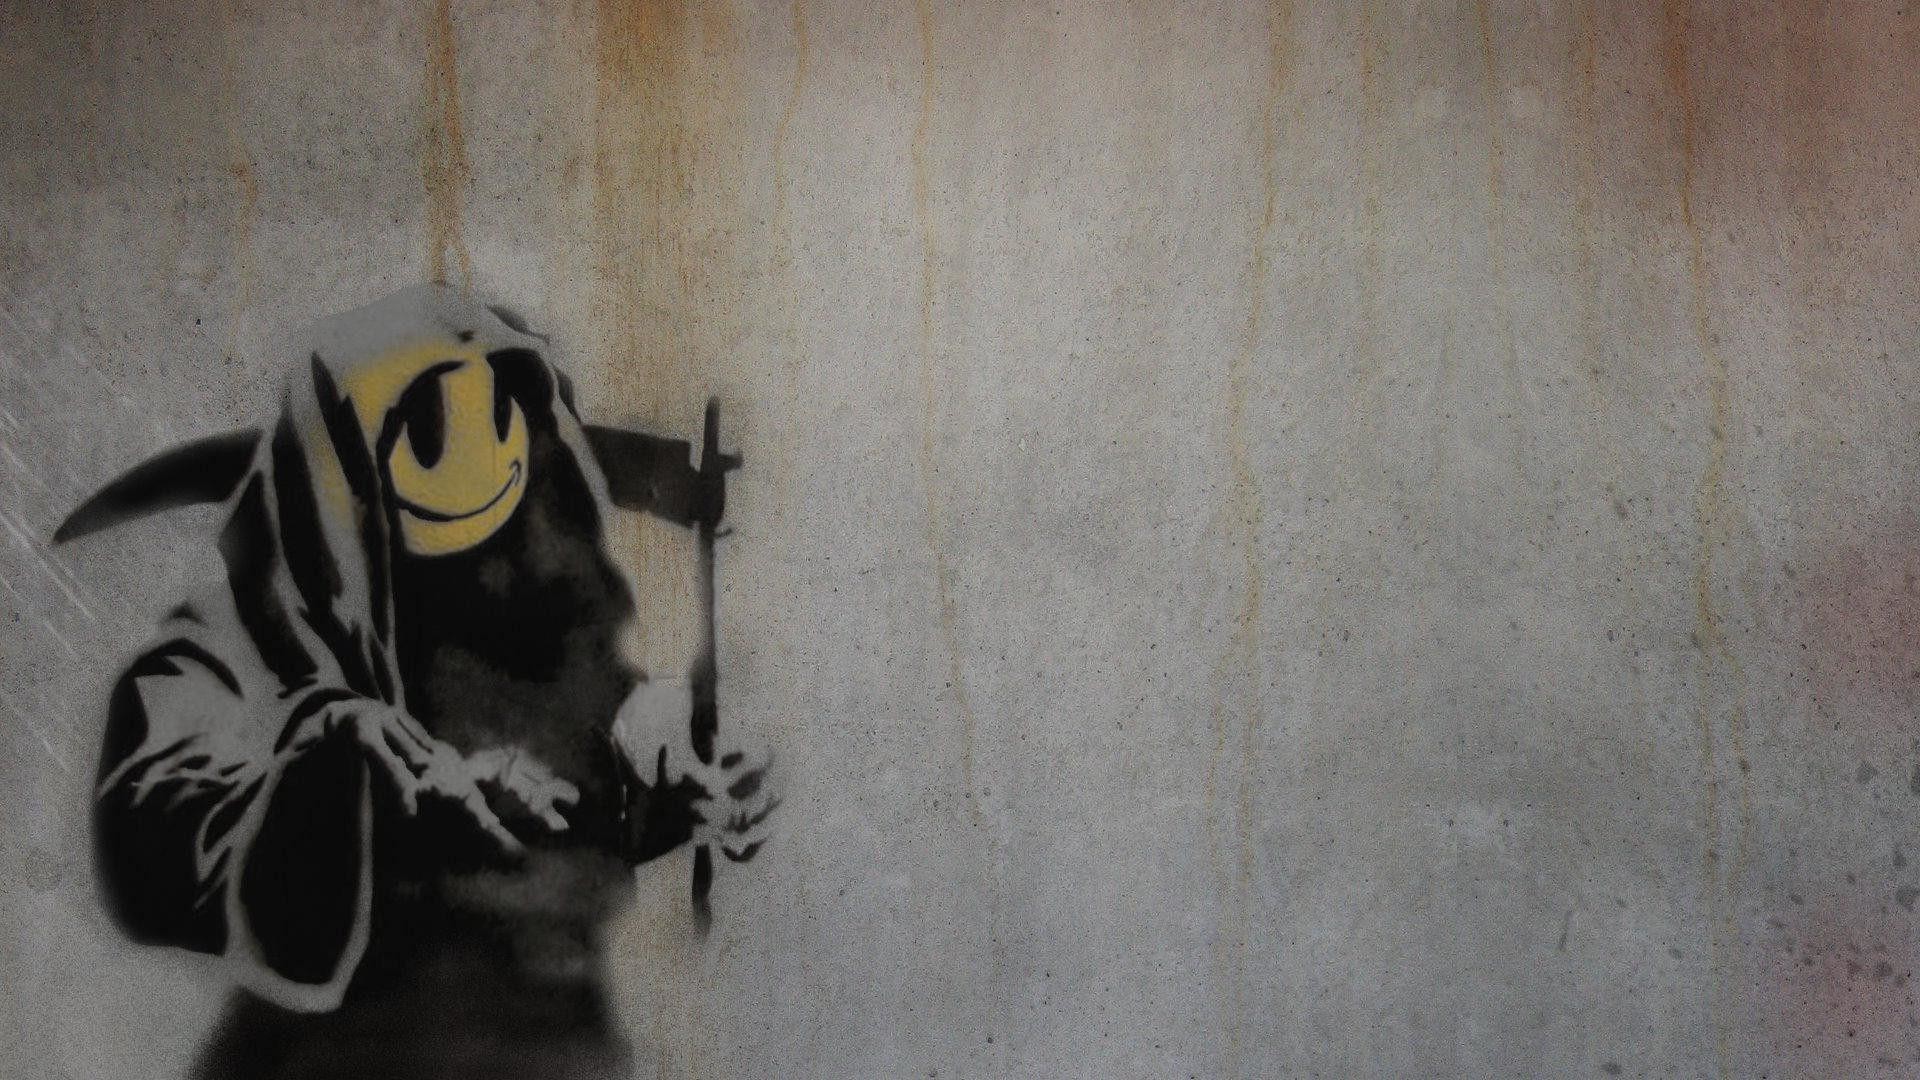 1920x1080 1505753 Banksy Wallpapers HD free wallpapers backgrounds images .